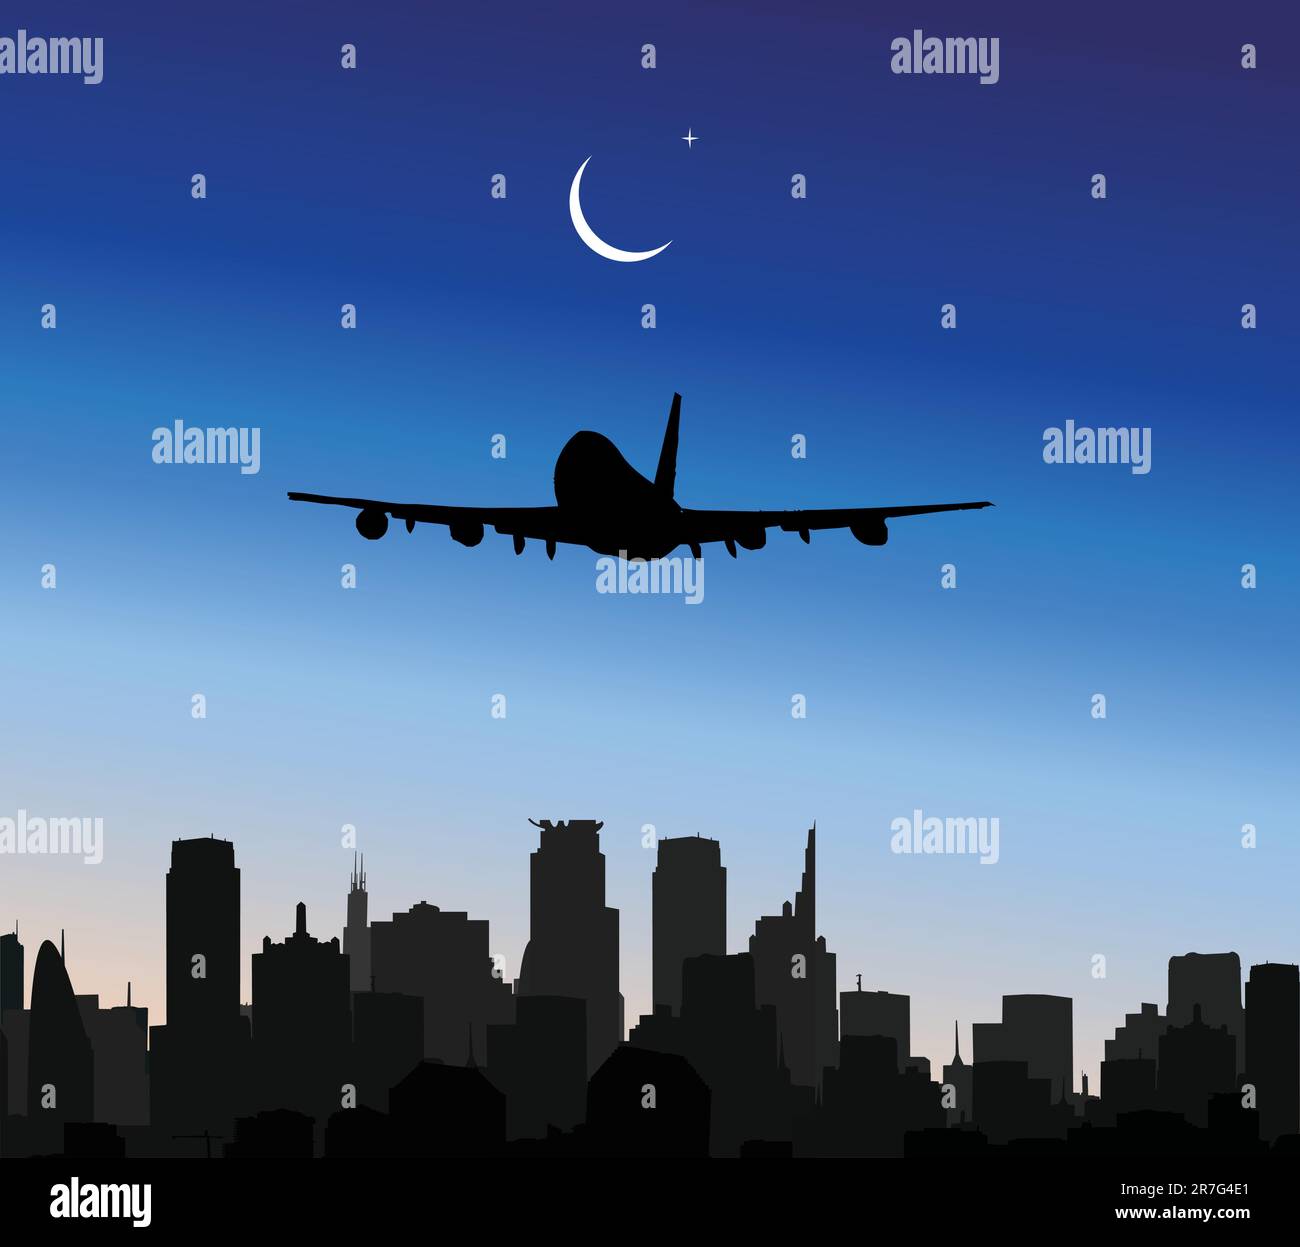 airplane flying in sky Stock Vector